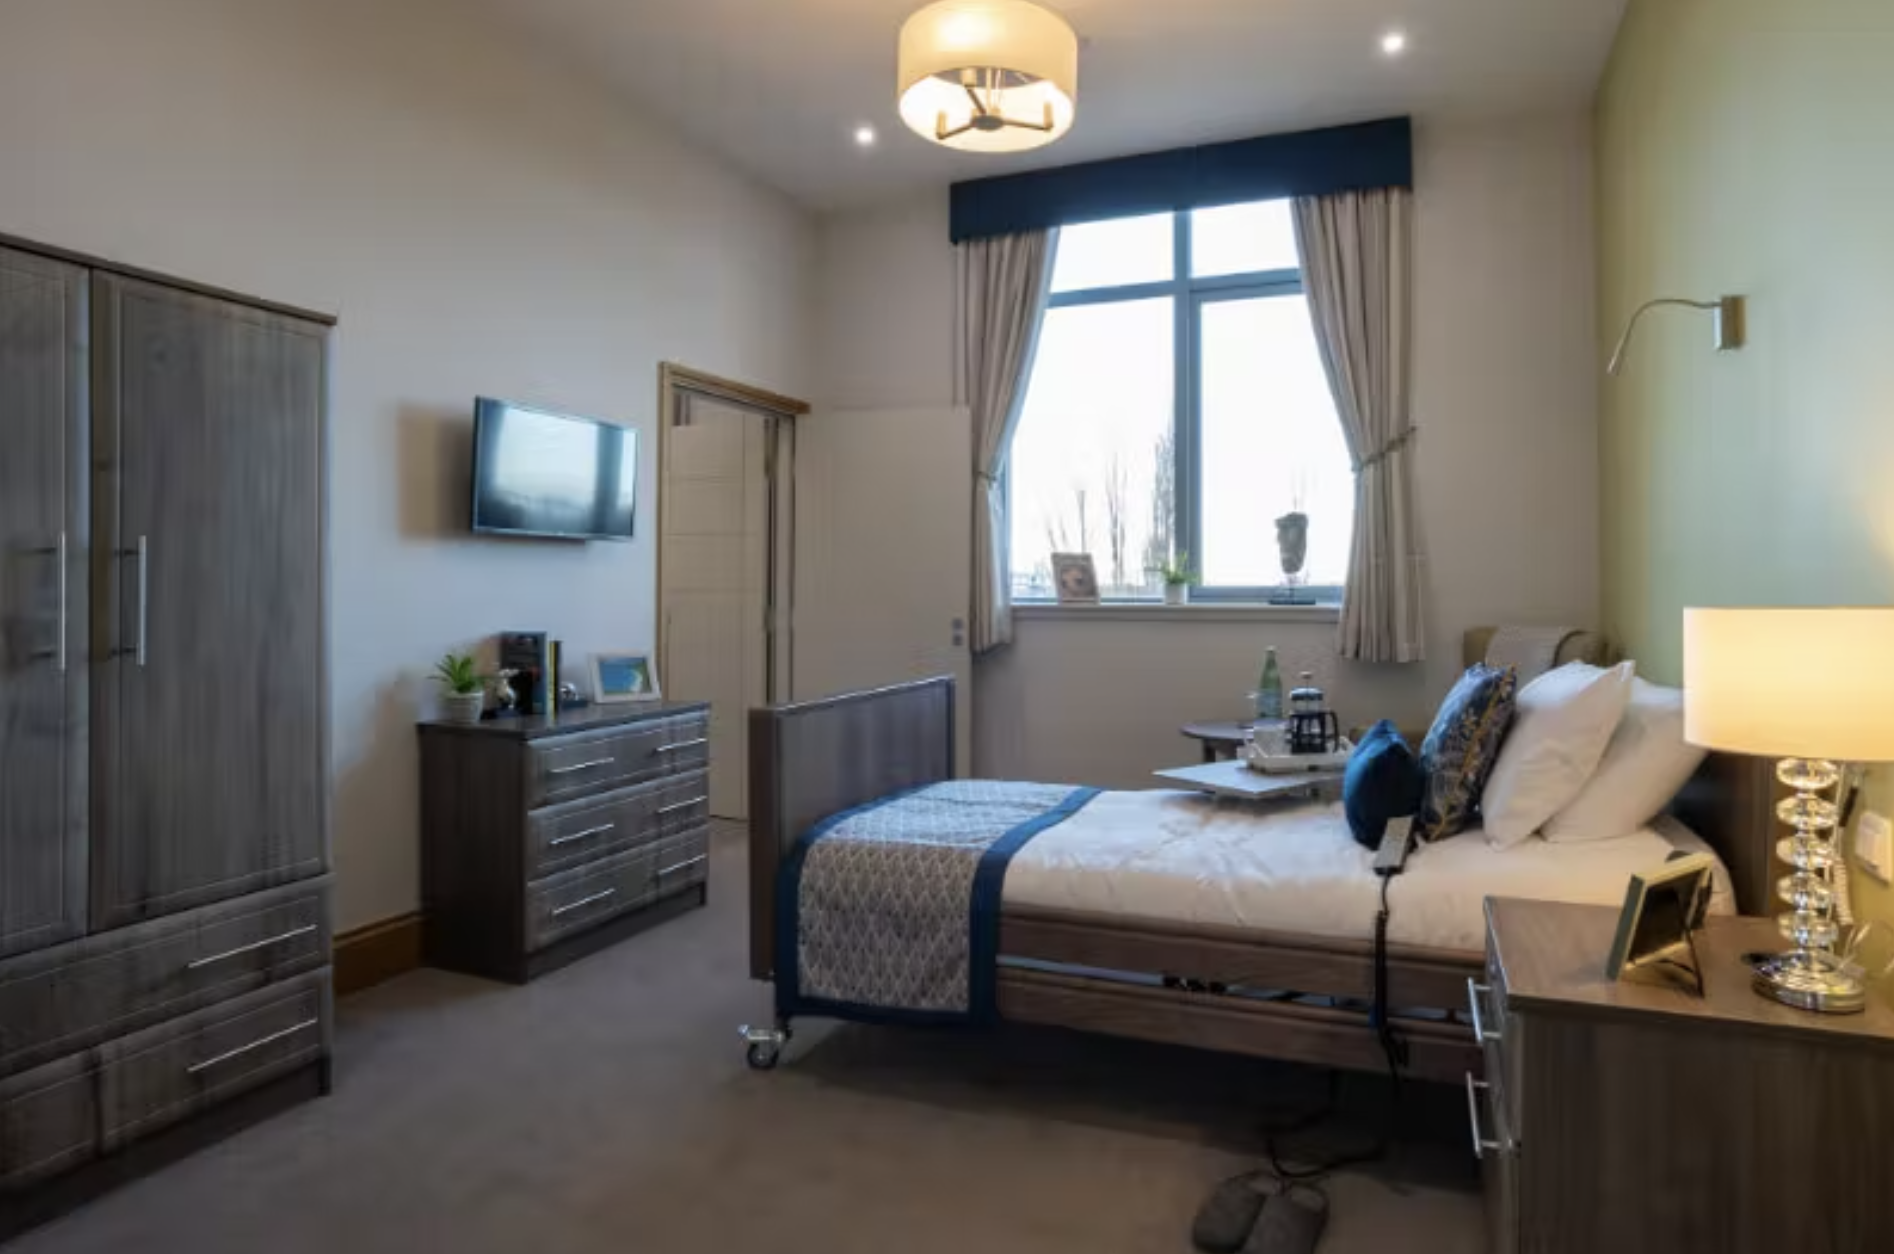 Independent Care Home - Valerian Court care home 12